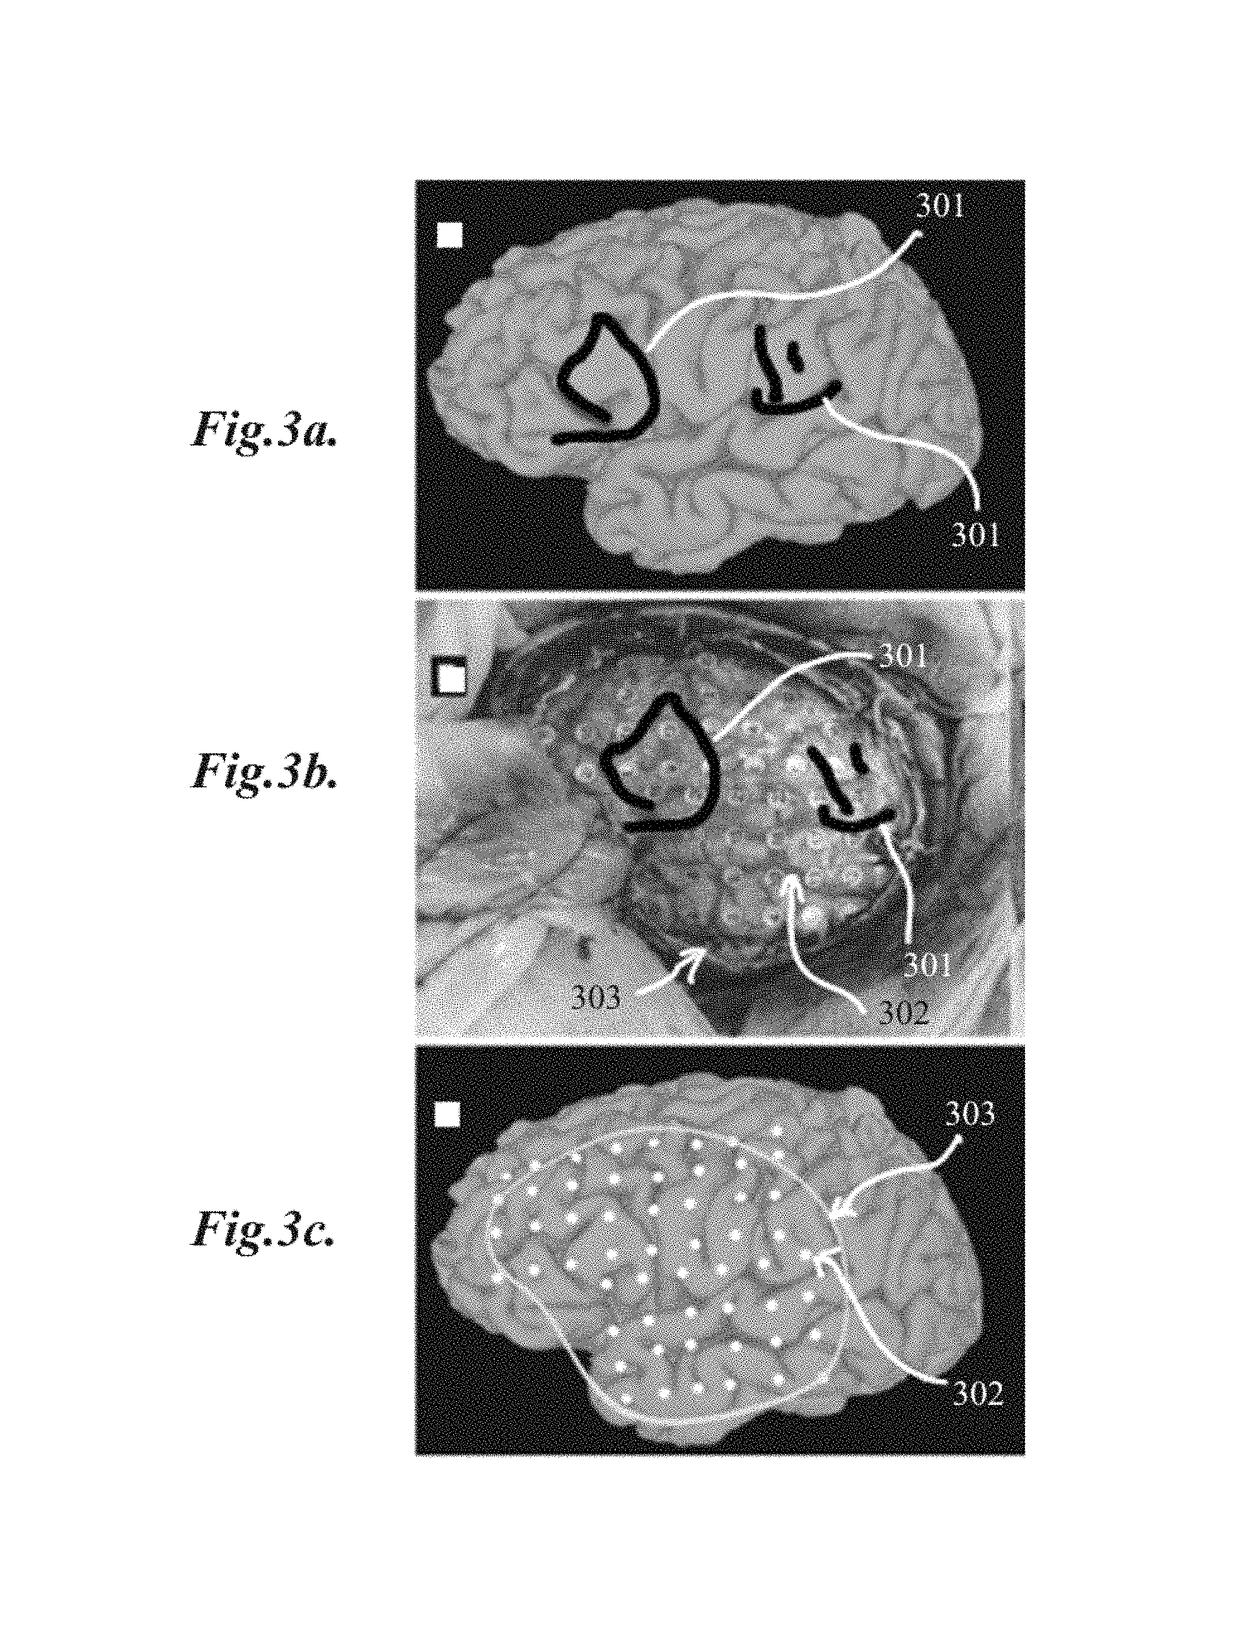 Subdural electrode localization and visualization using parcellated, manipulable cerebral mesh models